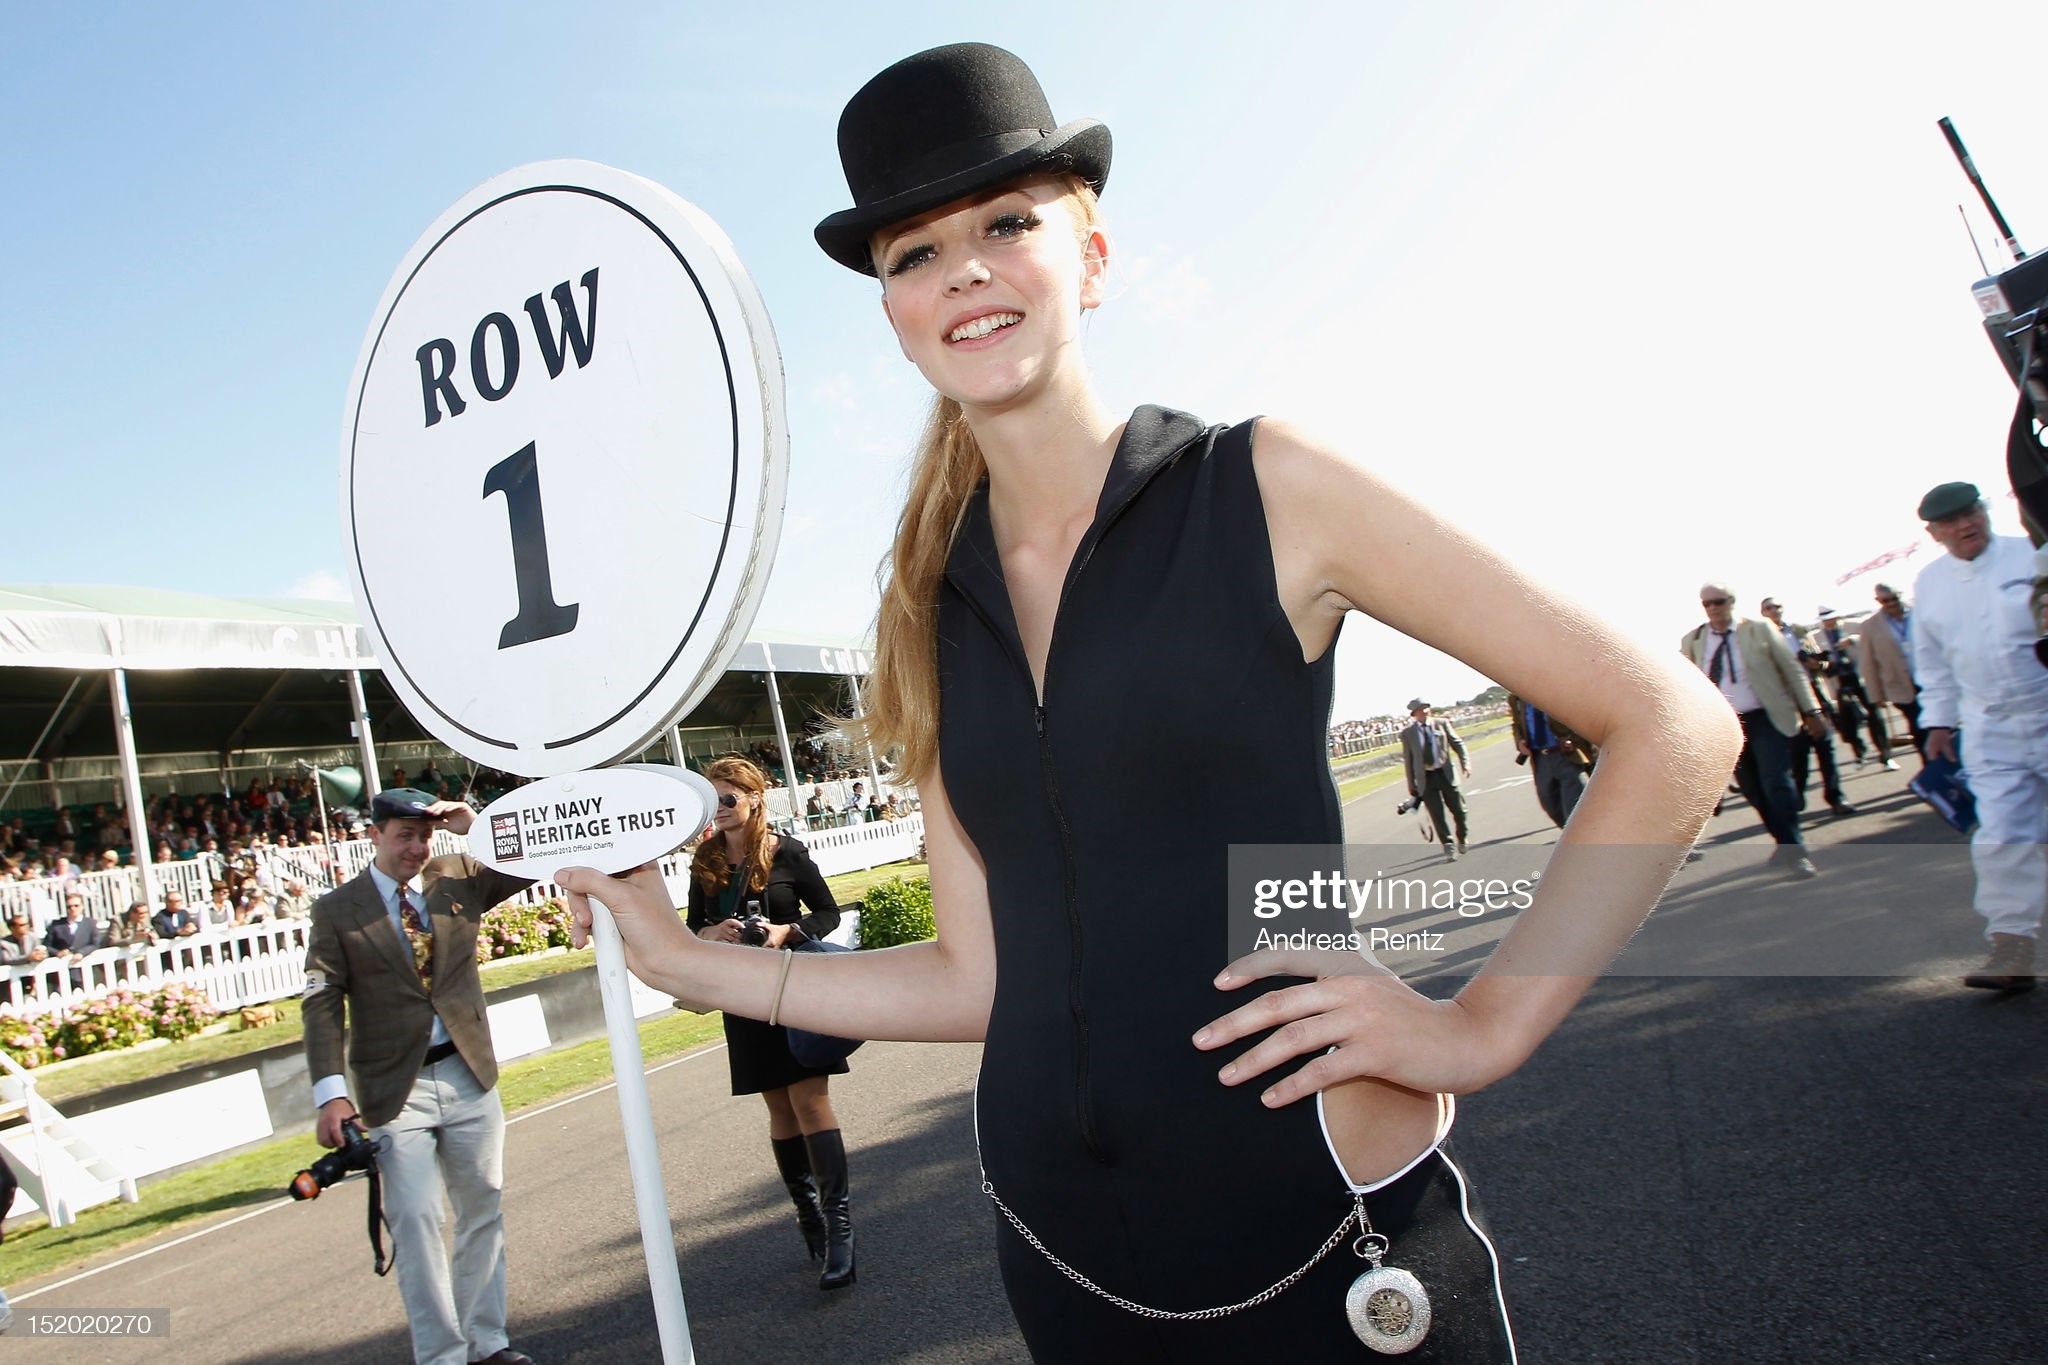 A grid girl attends the Shelby Cup during the Goodwood Revival 2012 on September 15, 2012 in Chichester, United Kingdom. 